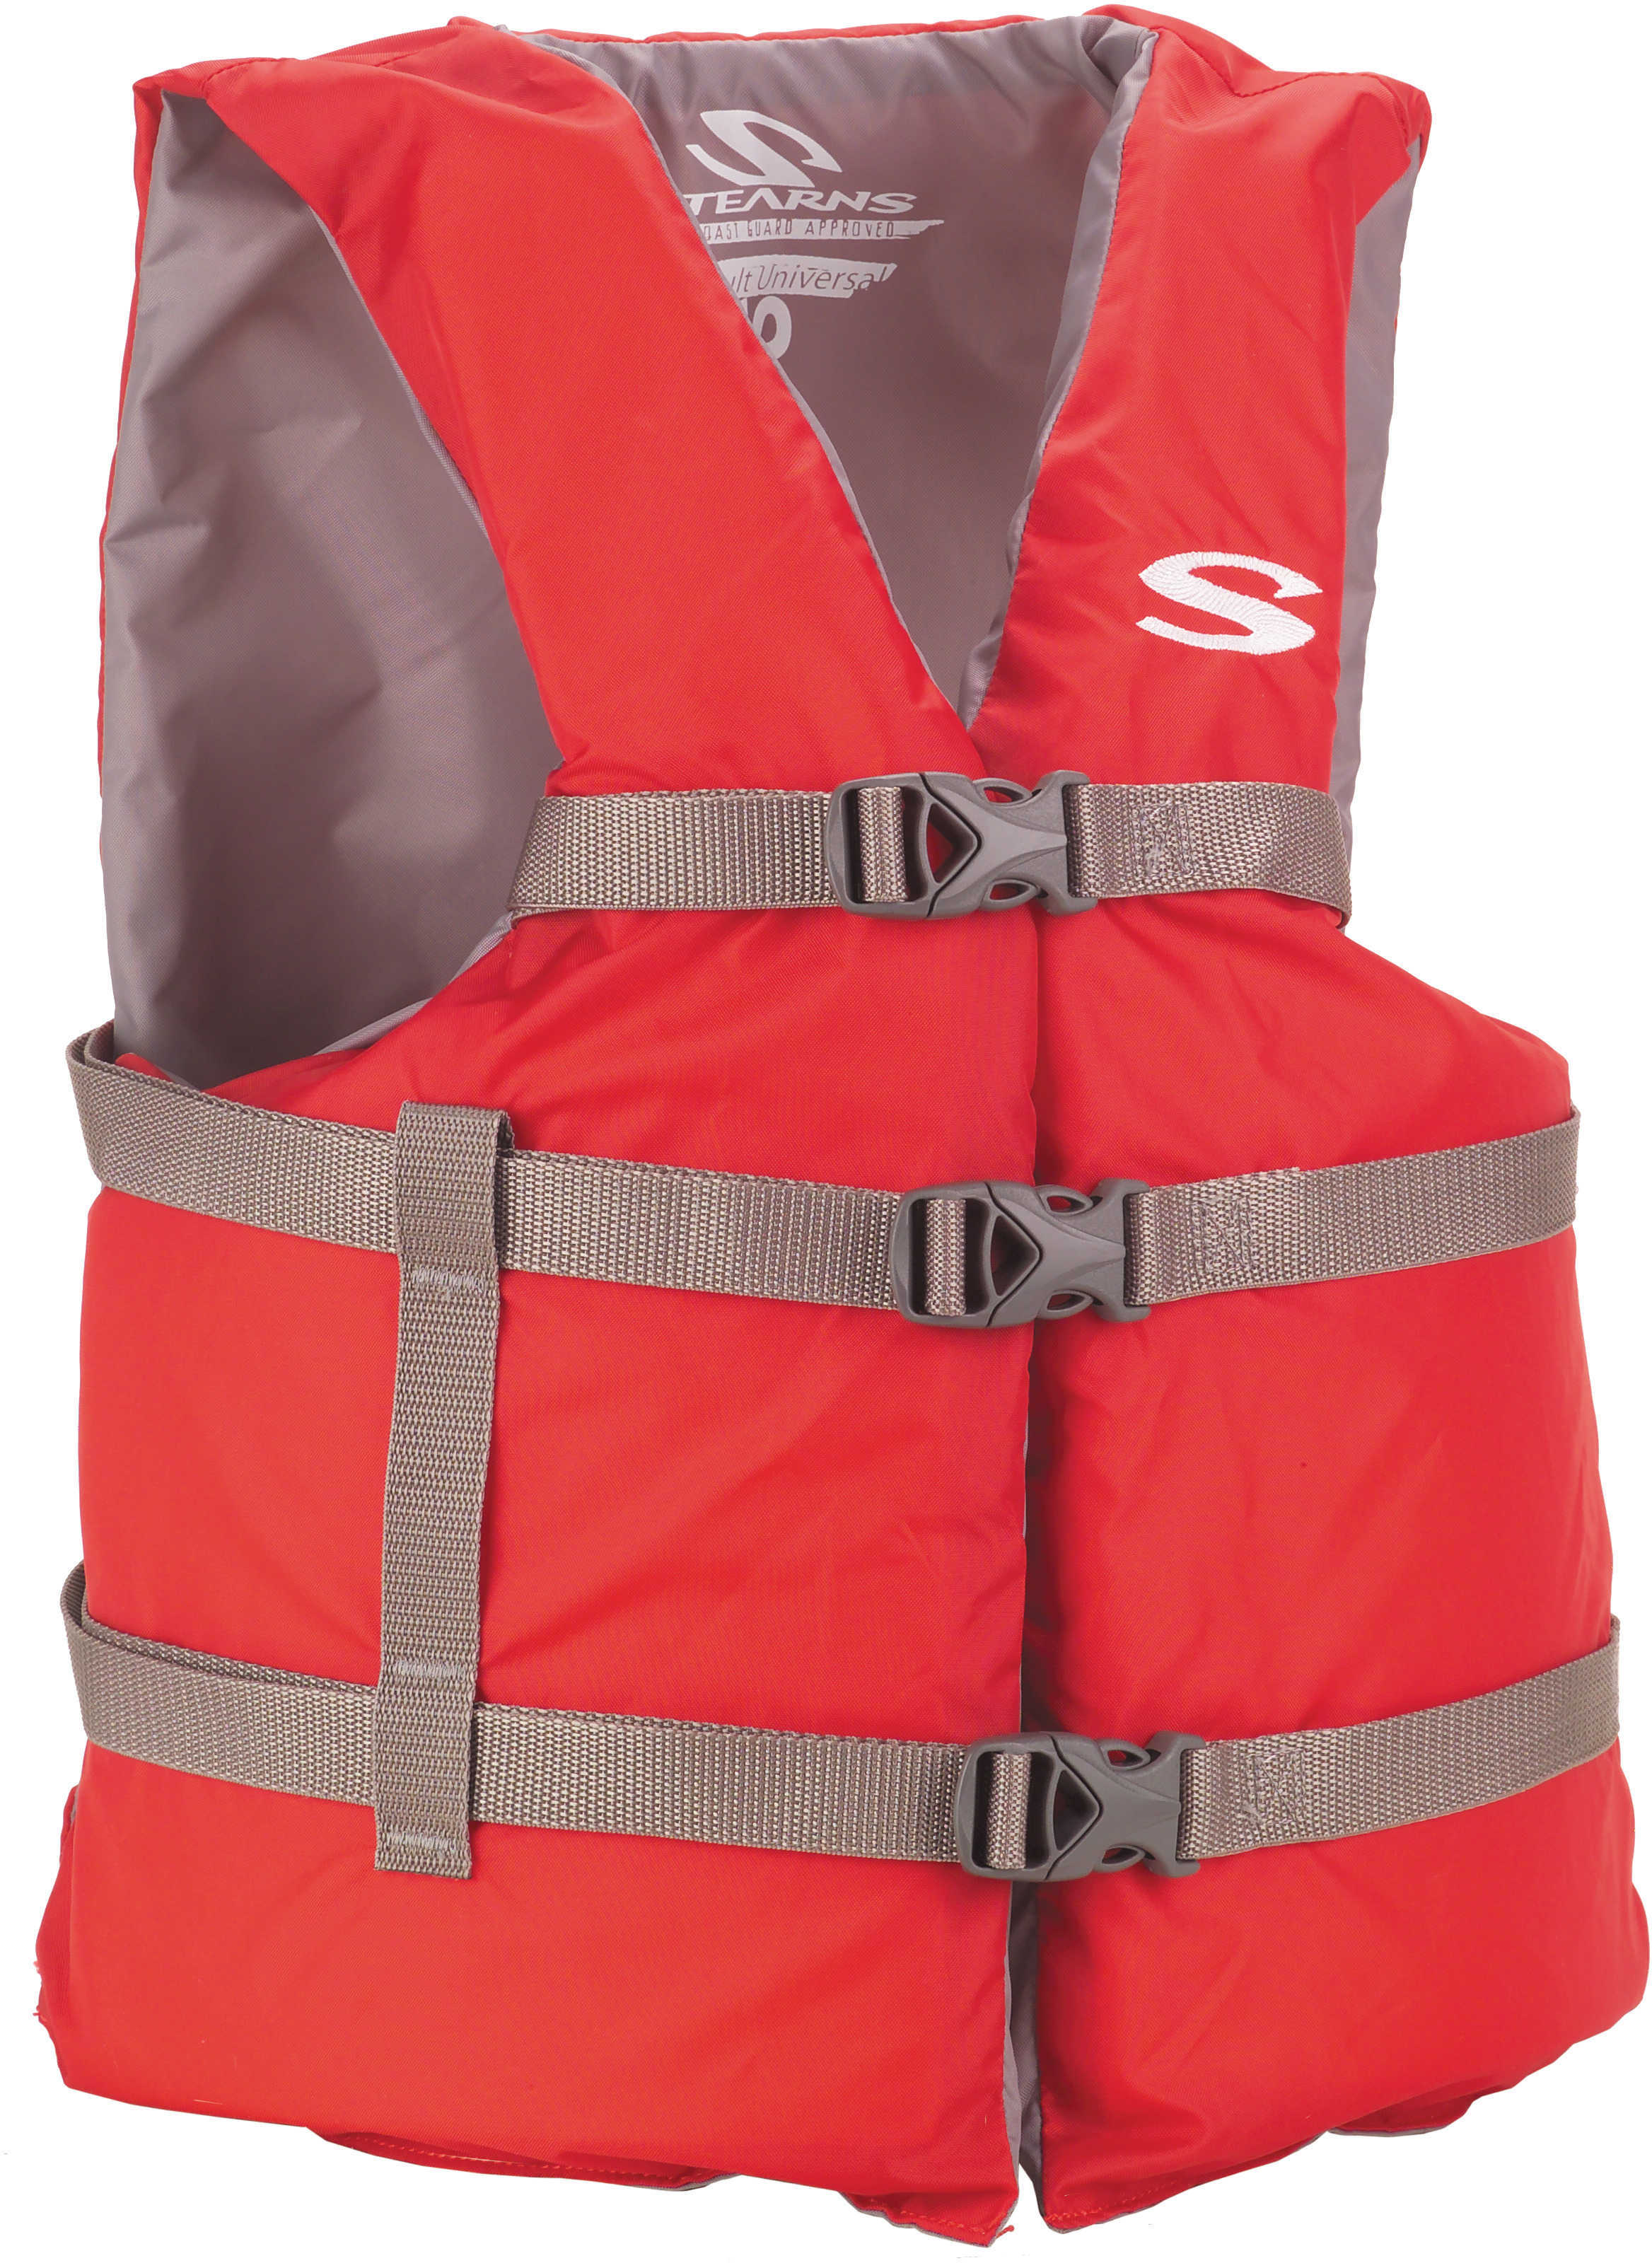 Stearns Pfd 2001 Cat Adult Boating Uni Red 3000004474